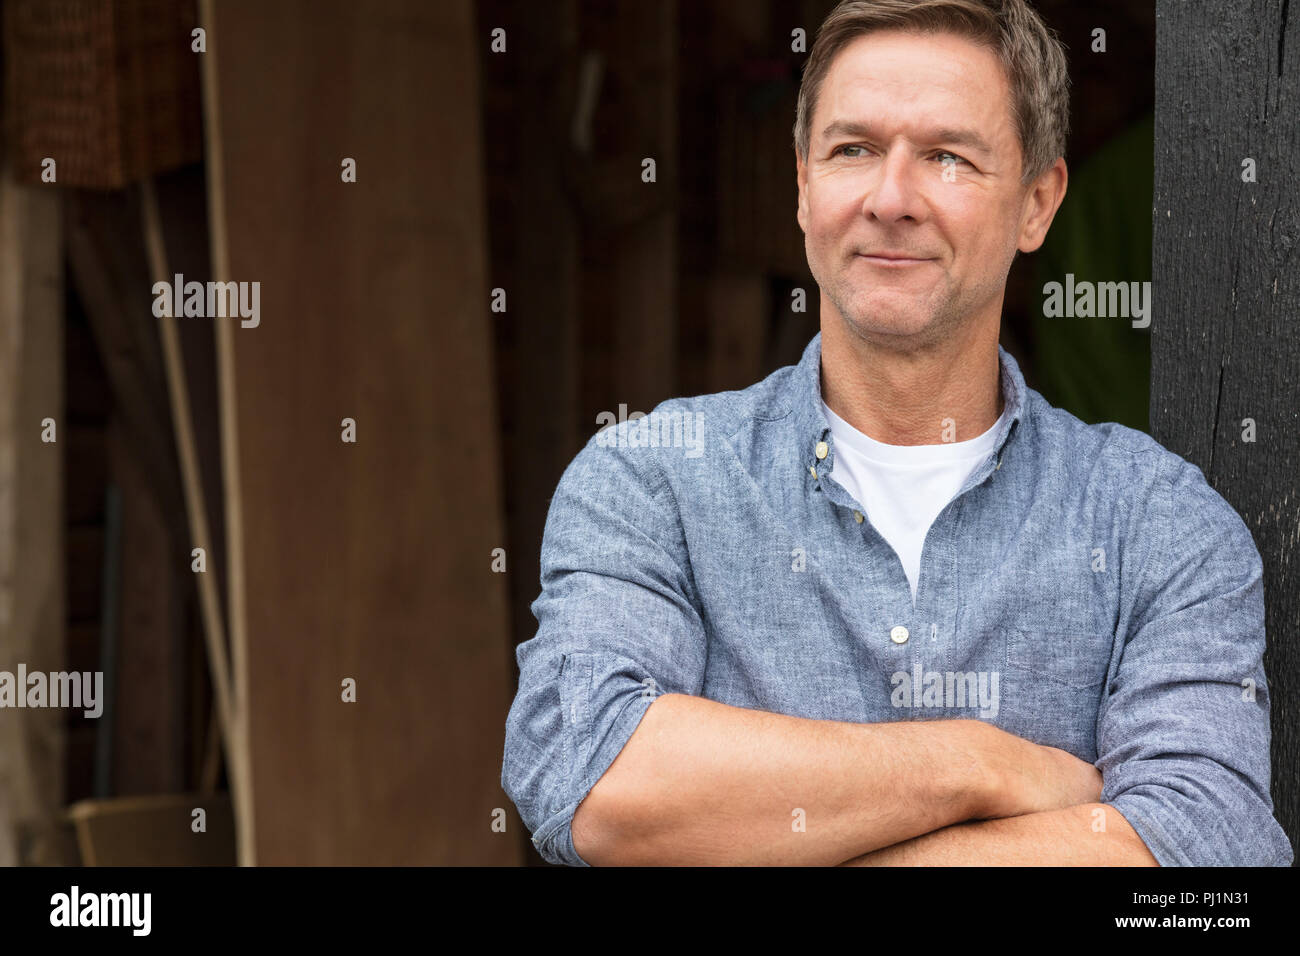 Portrait shot of an attractive, successful and happy middle aged man male wearing a blue shirt leaning on a post by a garage or barn Stock Photo